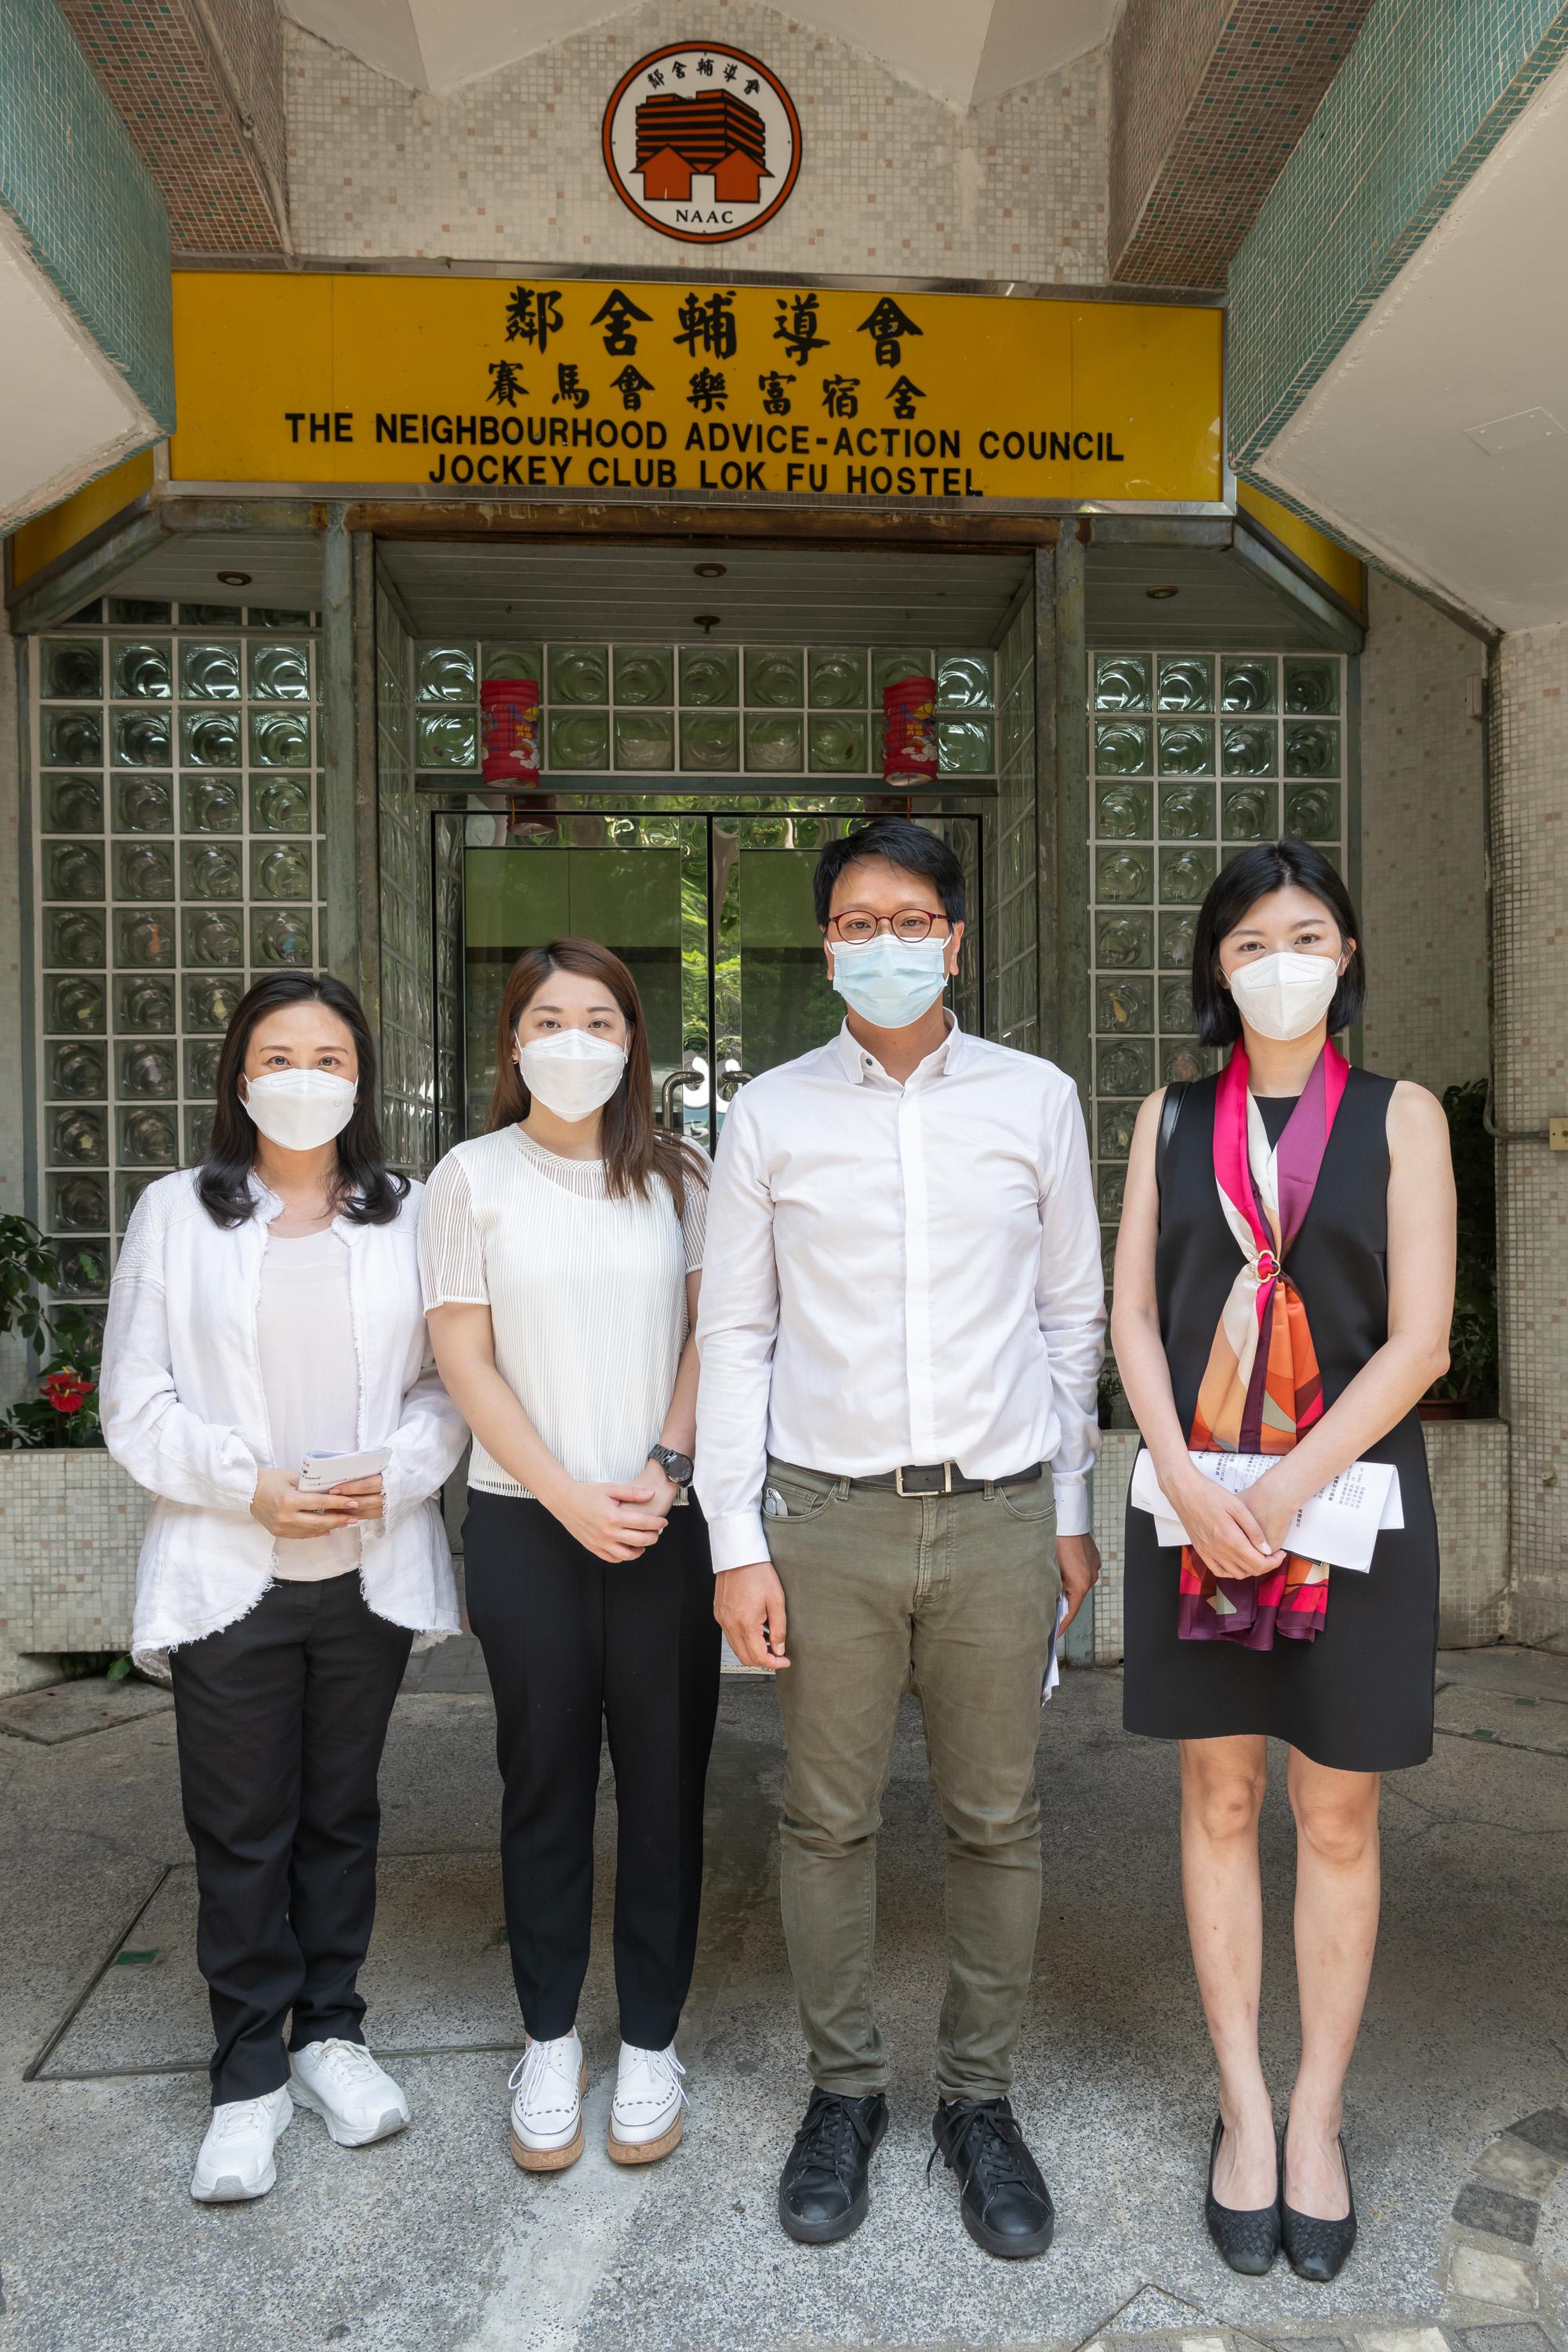 Members of the Legislative Council visited the Jockey Club Lok Fu Hostel operated by the Neighbourhood Advice-Action Council today (August 23). Photo shows (from left) Ms Elizabeth Quat, Ms Lam So-wai, Mr Tang Ka-piu and Ms Yung Hoi-yan at the entrance of the Hostel.